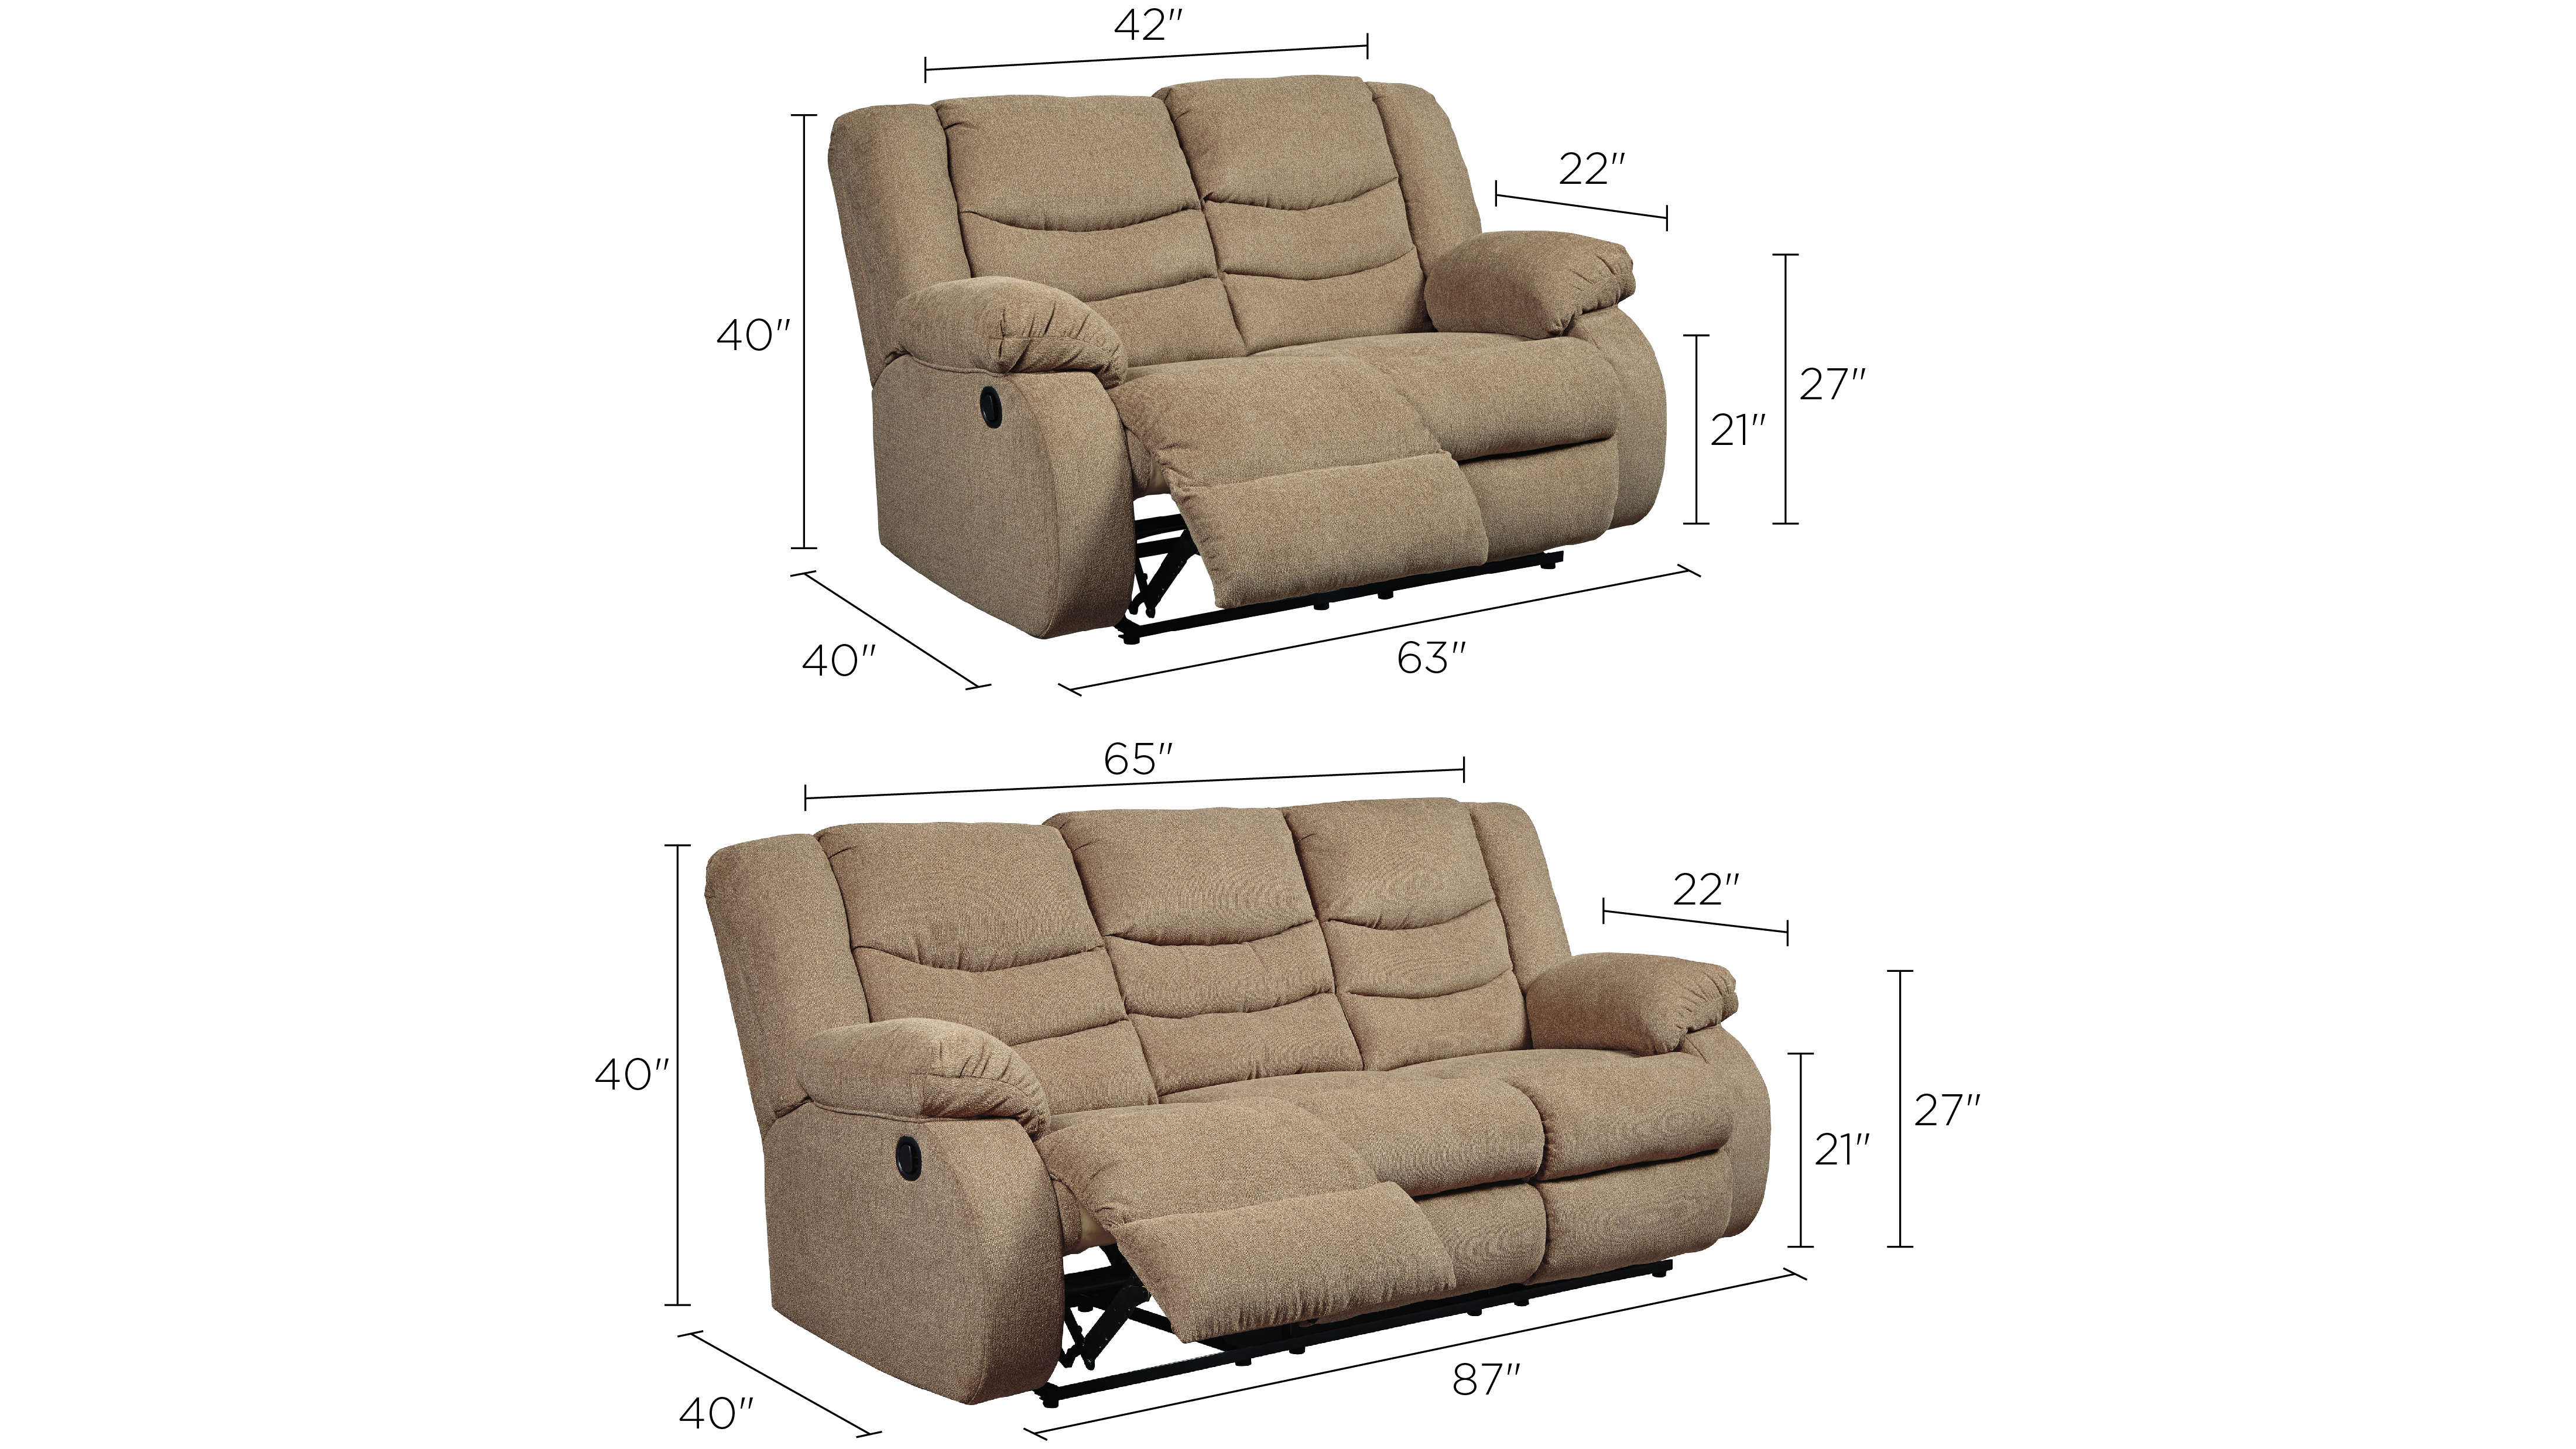 Southgate 2-pc. Reclining Sofa and Loveseat Set | Raymour & Flanigan